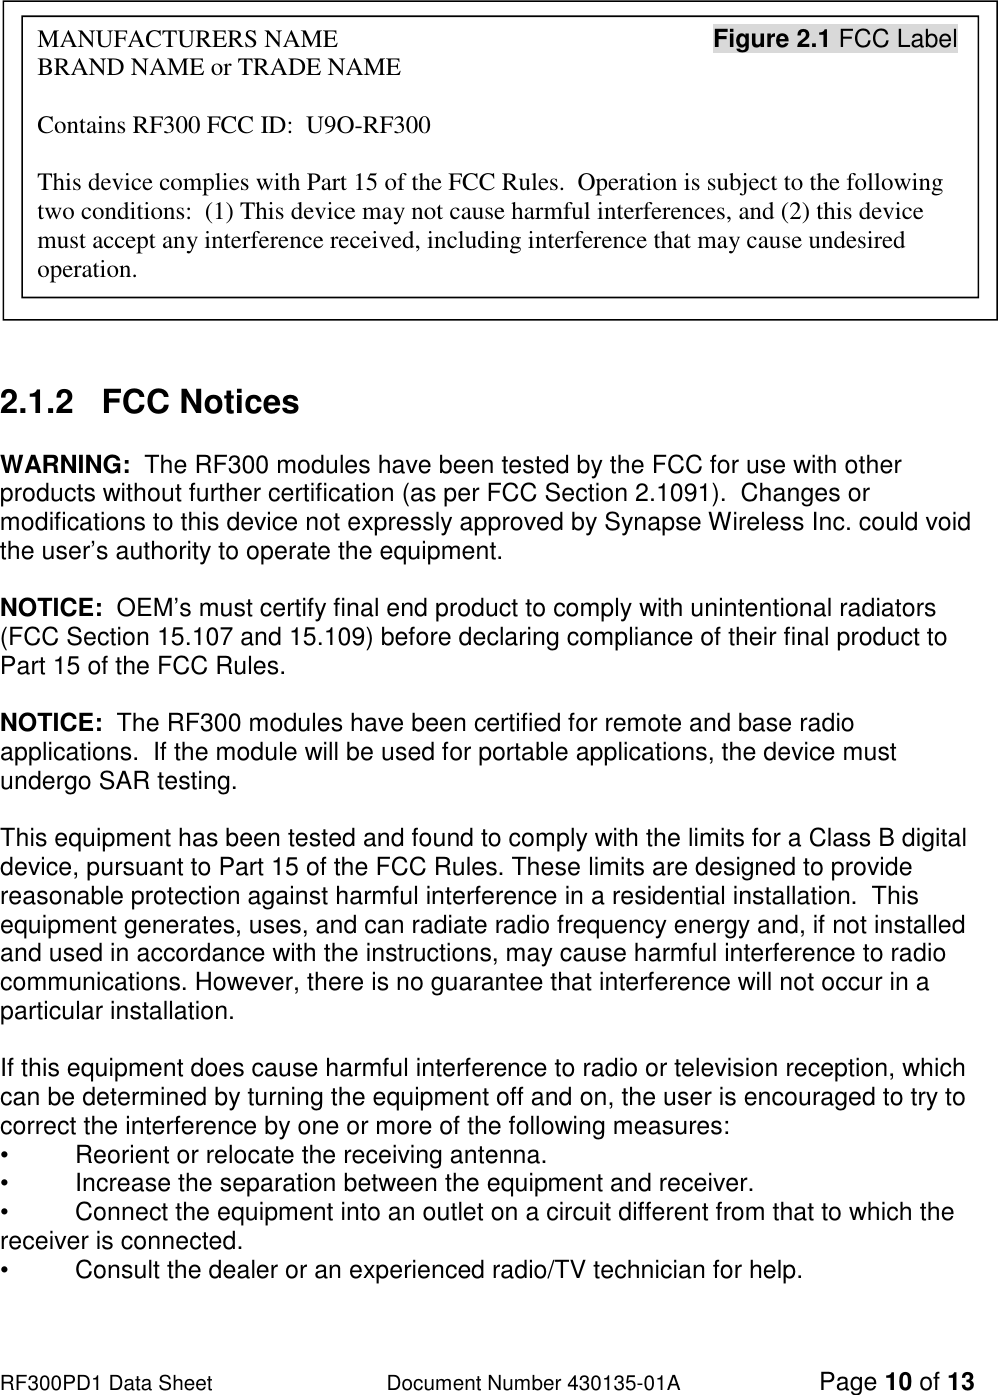                                                                                                                                                                          RF300PD1 Data Sheet                   Document Number 430135-01A Page 10 of 13            2.1.2   FCC Notices  WARNING:  The RF300 modules have been tested by the FCC for use with other products without further certification (as per FCC Section 2.1091).  Changes or modifications to this device not expressly approved by Synapse Wireless Inc. could void the user’s authority to operate the equipment.  NOTICE:  OEM’s must certify final end product to comply with unintentional radiators (FCC Section 15.107 and 15.109) before declaring compliance of their final product to Part 15 of the FCC Rules.  NOTICE:  The RF300 modules have been certified for remote and base radio applications.  If the module will be used for portable applications, the device must undergo SAR testing.  This equipment has been tested and found to comply with the limits for a Class B digital device, pursuant to Part 15 of the FCC Rules. These limits are designed to provide reasonable protection against harmful interference in a residential installation.  This equipment generates, uses, and can radiate radio frequency energy and, if not installed and used in accordance with the instructions, may cause harmful interference to radio communications. However, there is no guarantee that interference will not occur in a particular installation.   If this equipment does cause harmful interference to radio or television reception, which can be determined by turning the equipment off and on, the user is encouraged to try to correct the interference by one or more of the following measures: •   Reorient or relocate the receiving antenna. •   Increase the separation between the equipment and receiver. •   Connect the equipment into an outlet on a circuit different from that to which the receiver is connected. •   Consult the dealer or an experienced radio/TV technician for help. MANUFACTURERS NAME                                                            Figure 2.1 FCC Label BRAND NAME or TRADE NAME  Contains RF300 FCC ID:  U9O-RF300  This device complies with Part 15 of the FCC Rules.  Operation is subject to the following two conditions:  (1) This device may not cause harmful interferences, and (2) this device must accept any interference received, including interference that may cause undesired operation. 